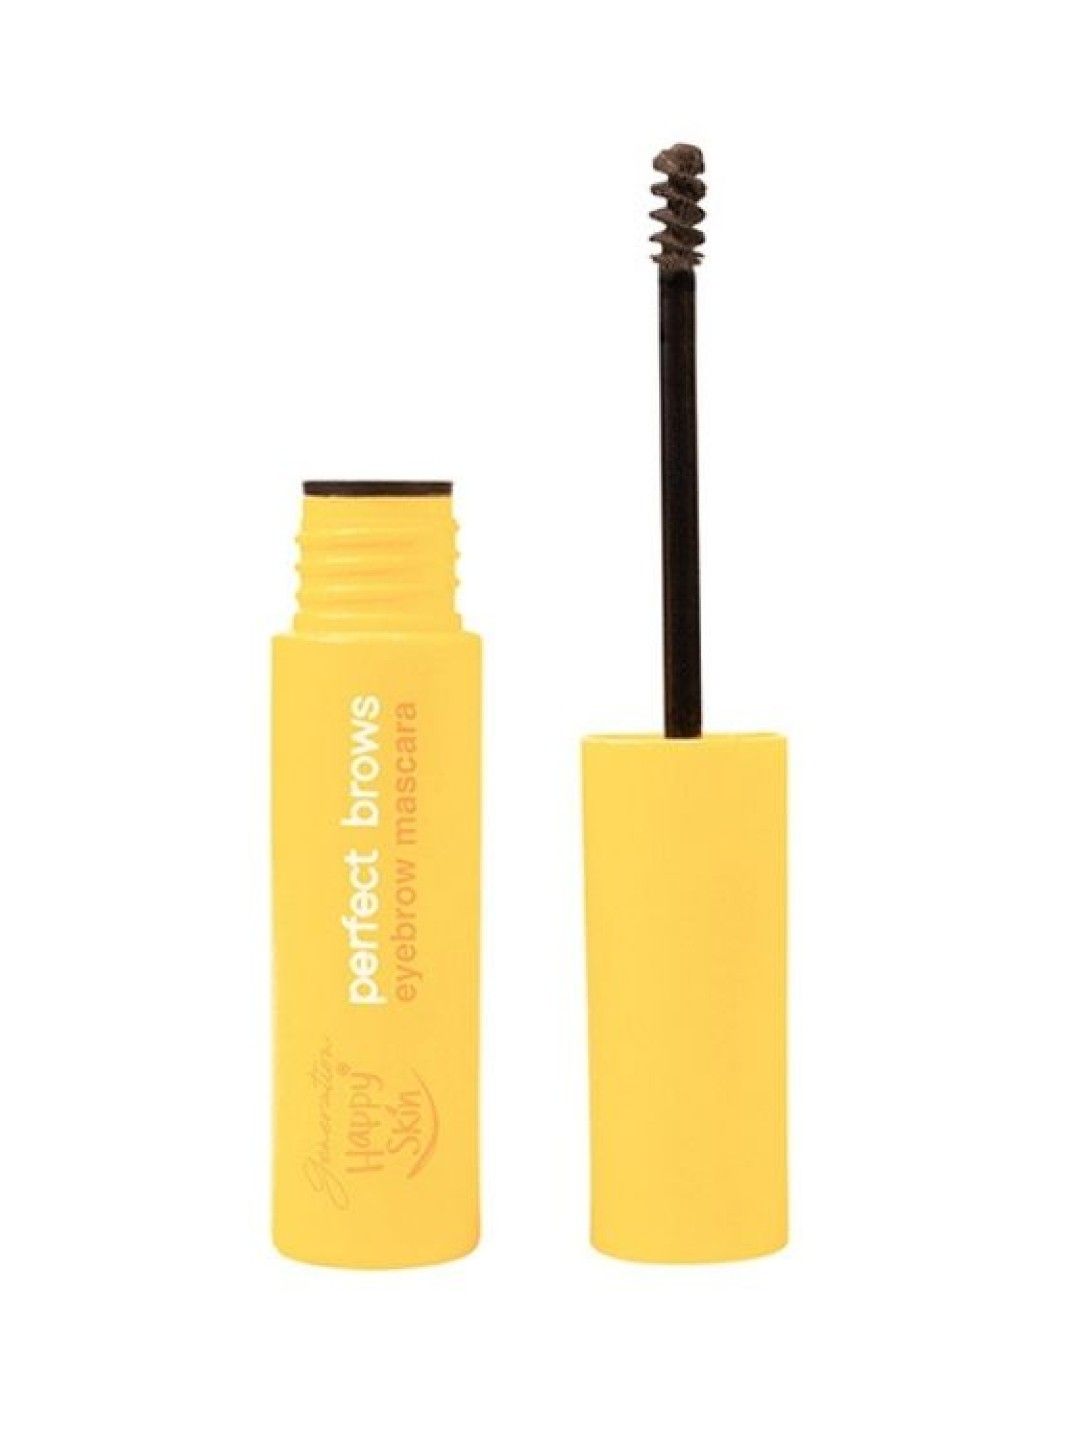 Happy Skin Generation Perfect Brows Eyebrow Mascara in Taupe